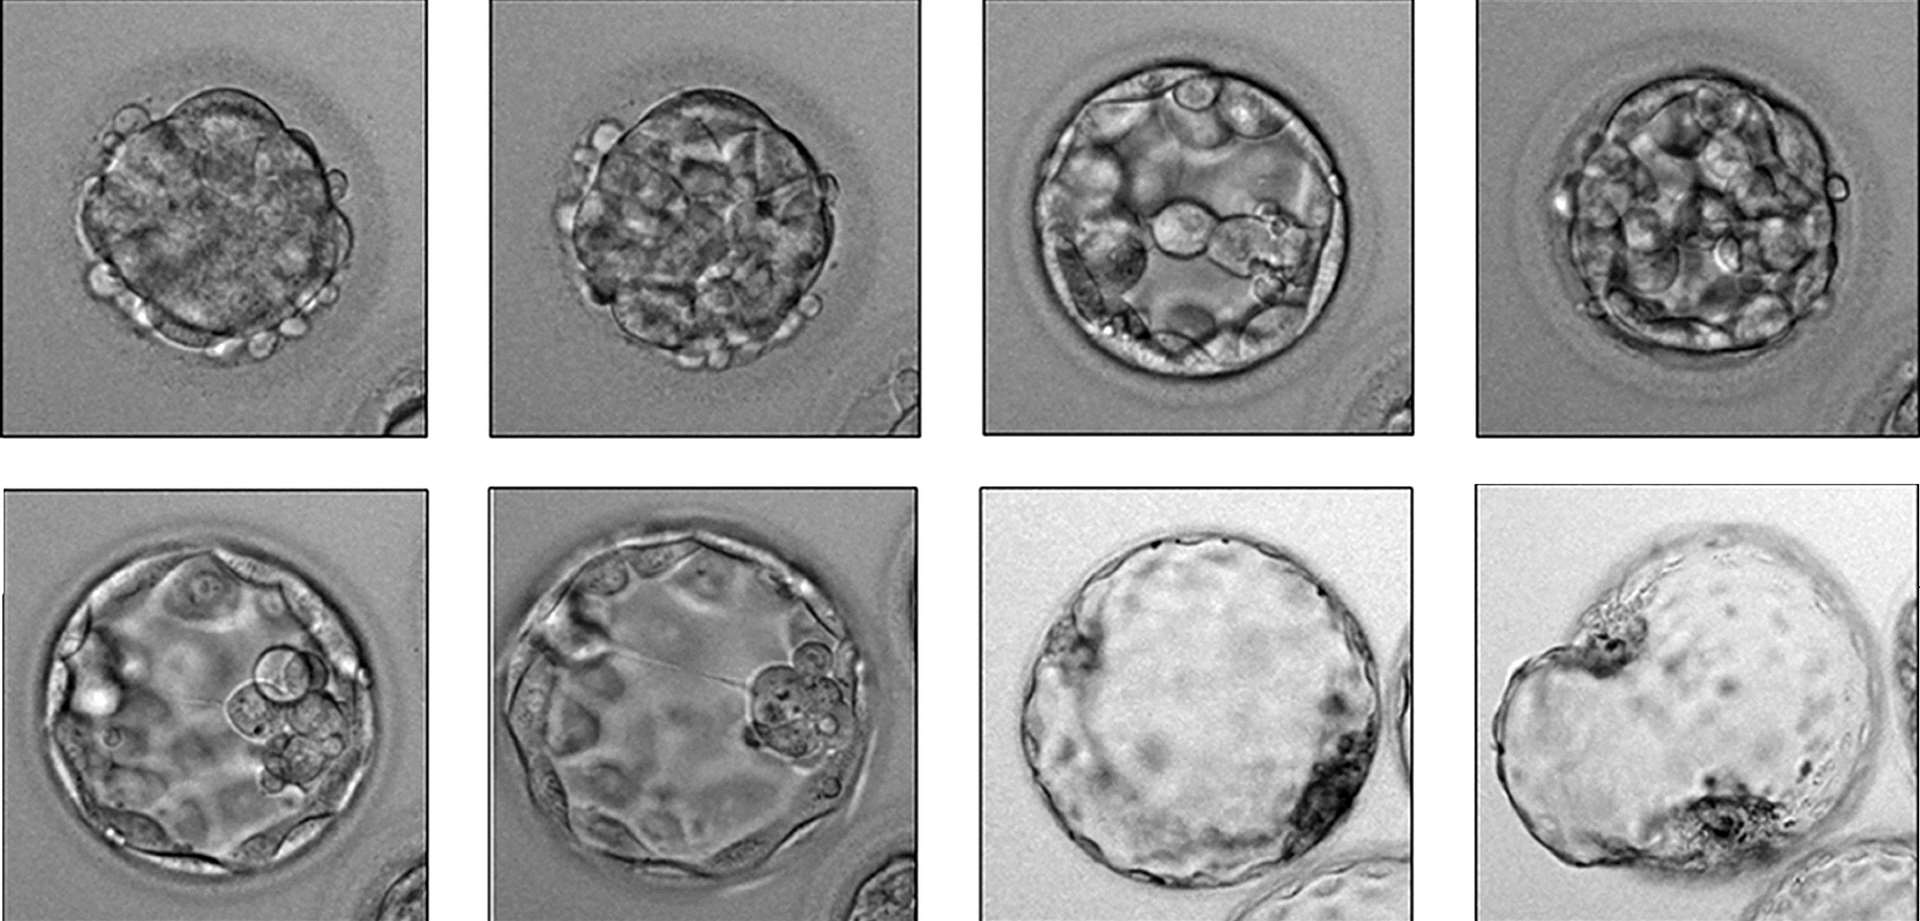 Time-lapse images showing an early embryo developing (PA)